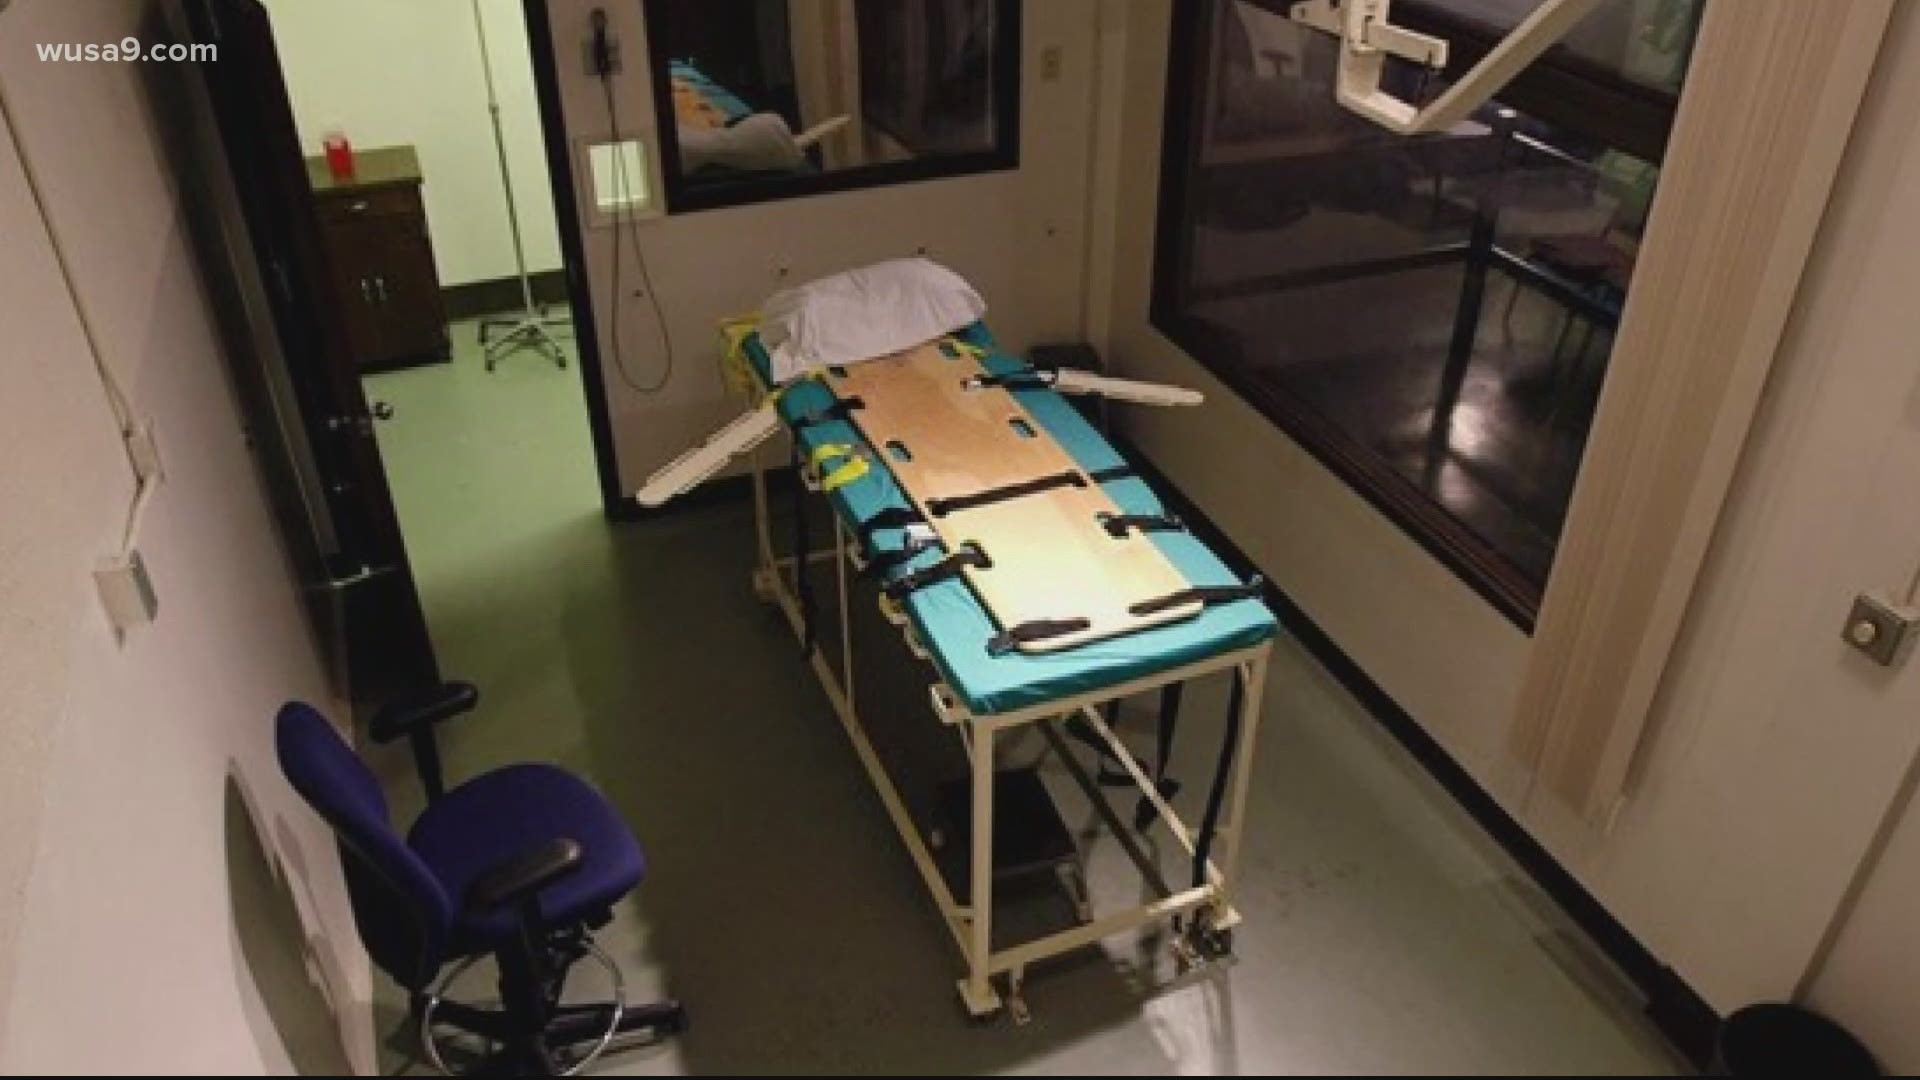 Gov. Ralph Northam will sign a bill banning the death penalty on Wednesday.